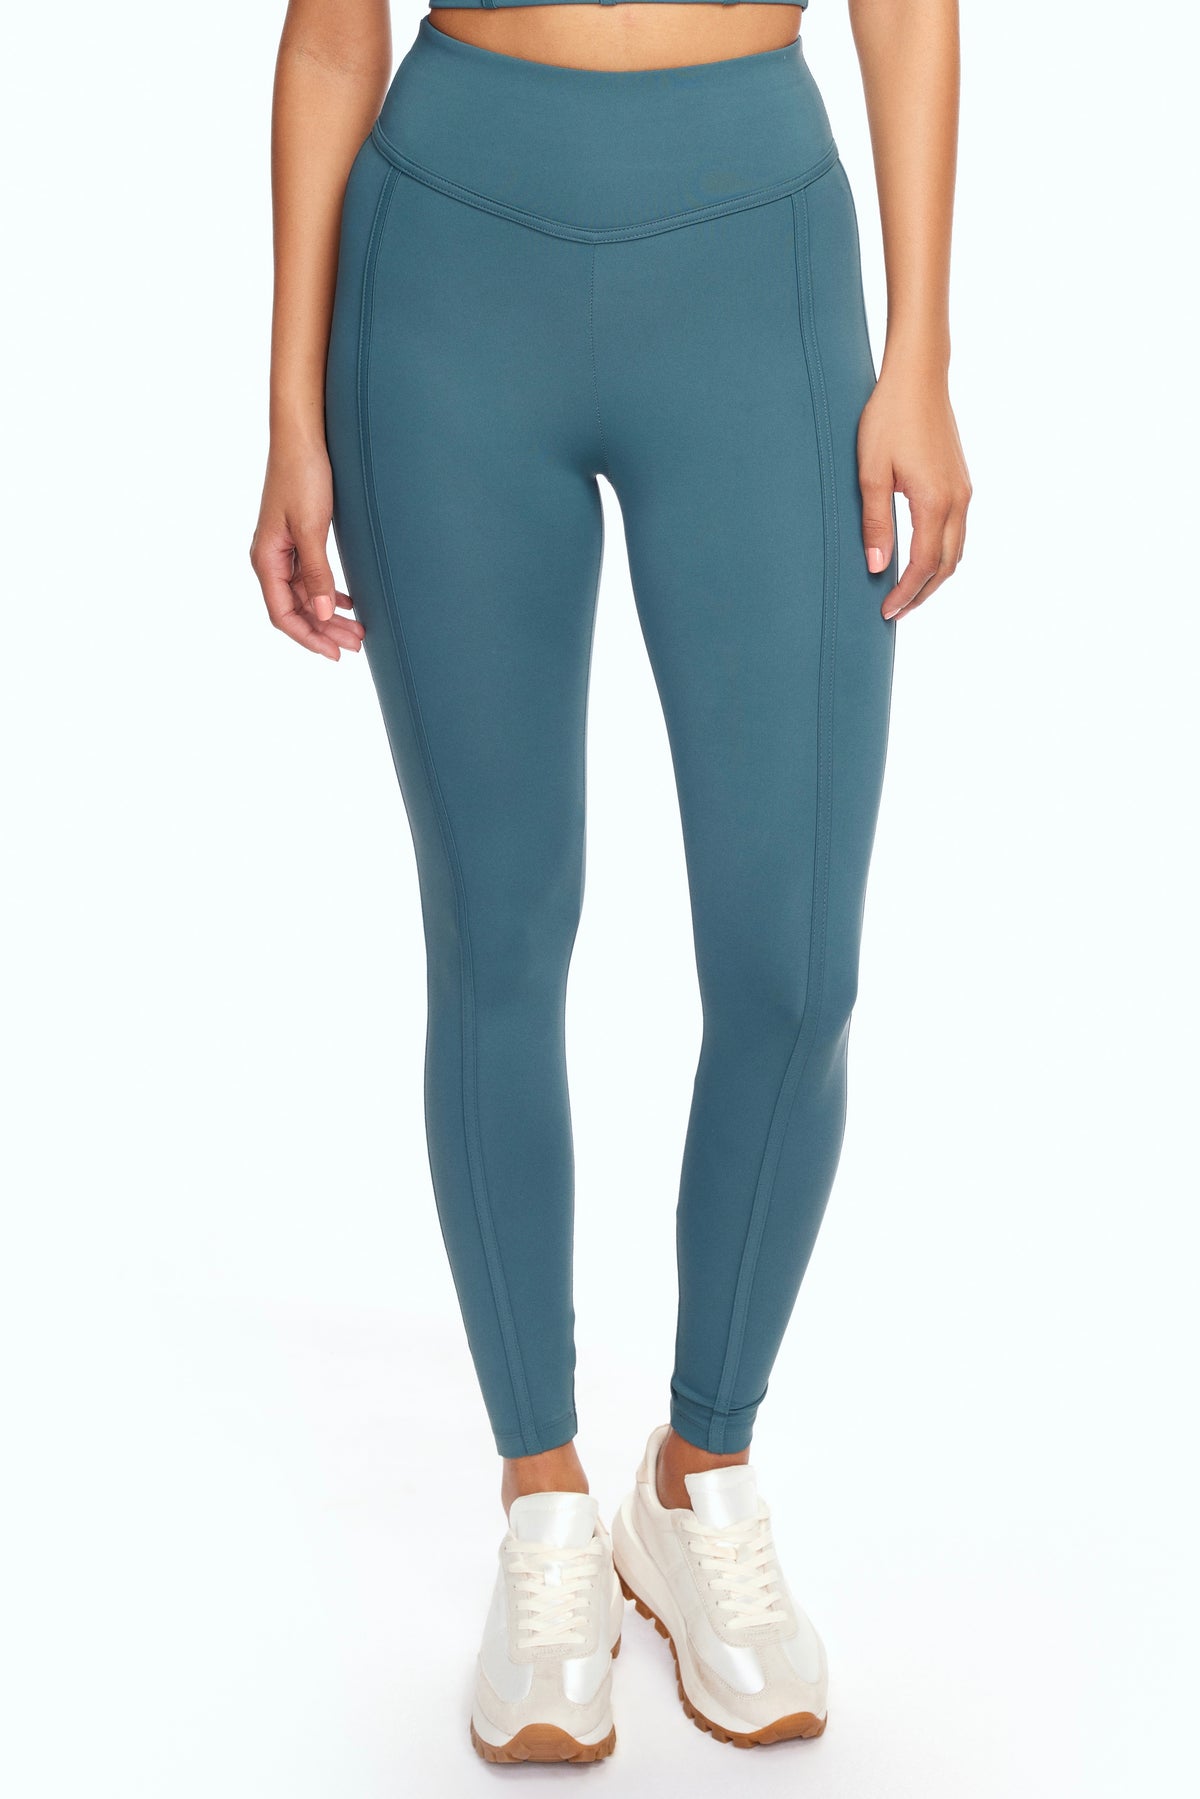 Ivy Tie-up Leggings – Pace Active